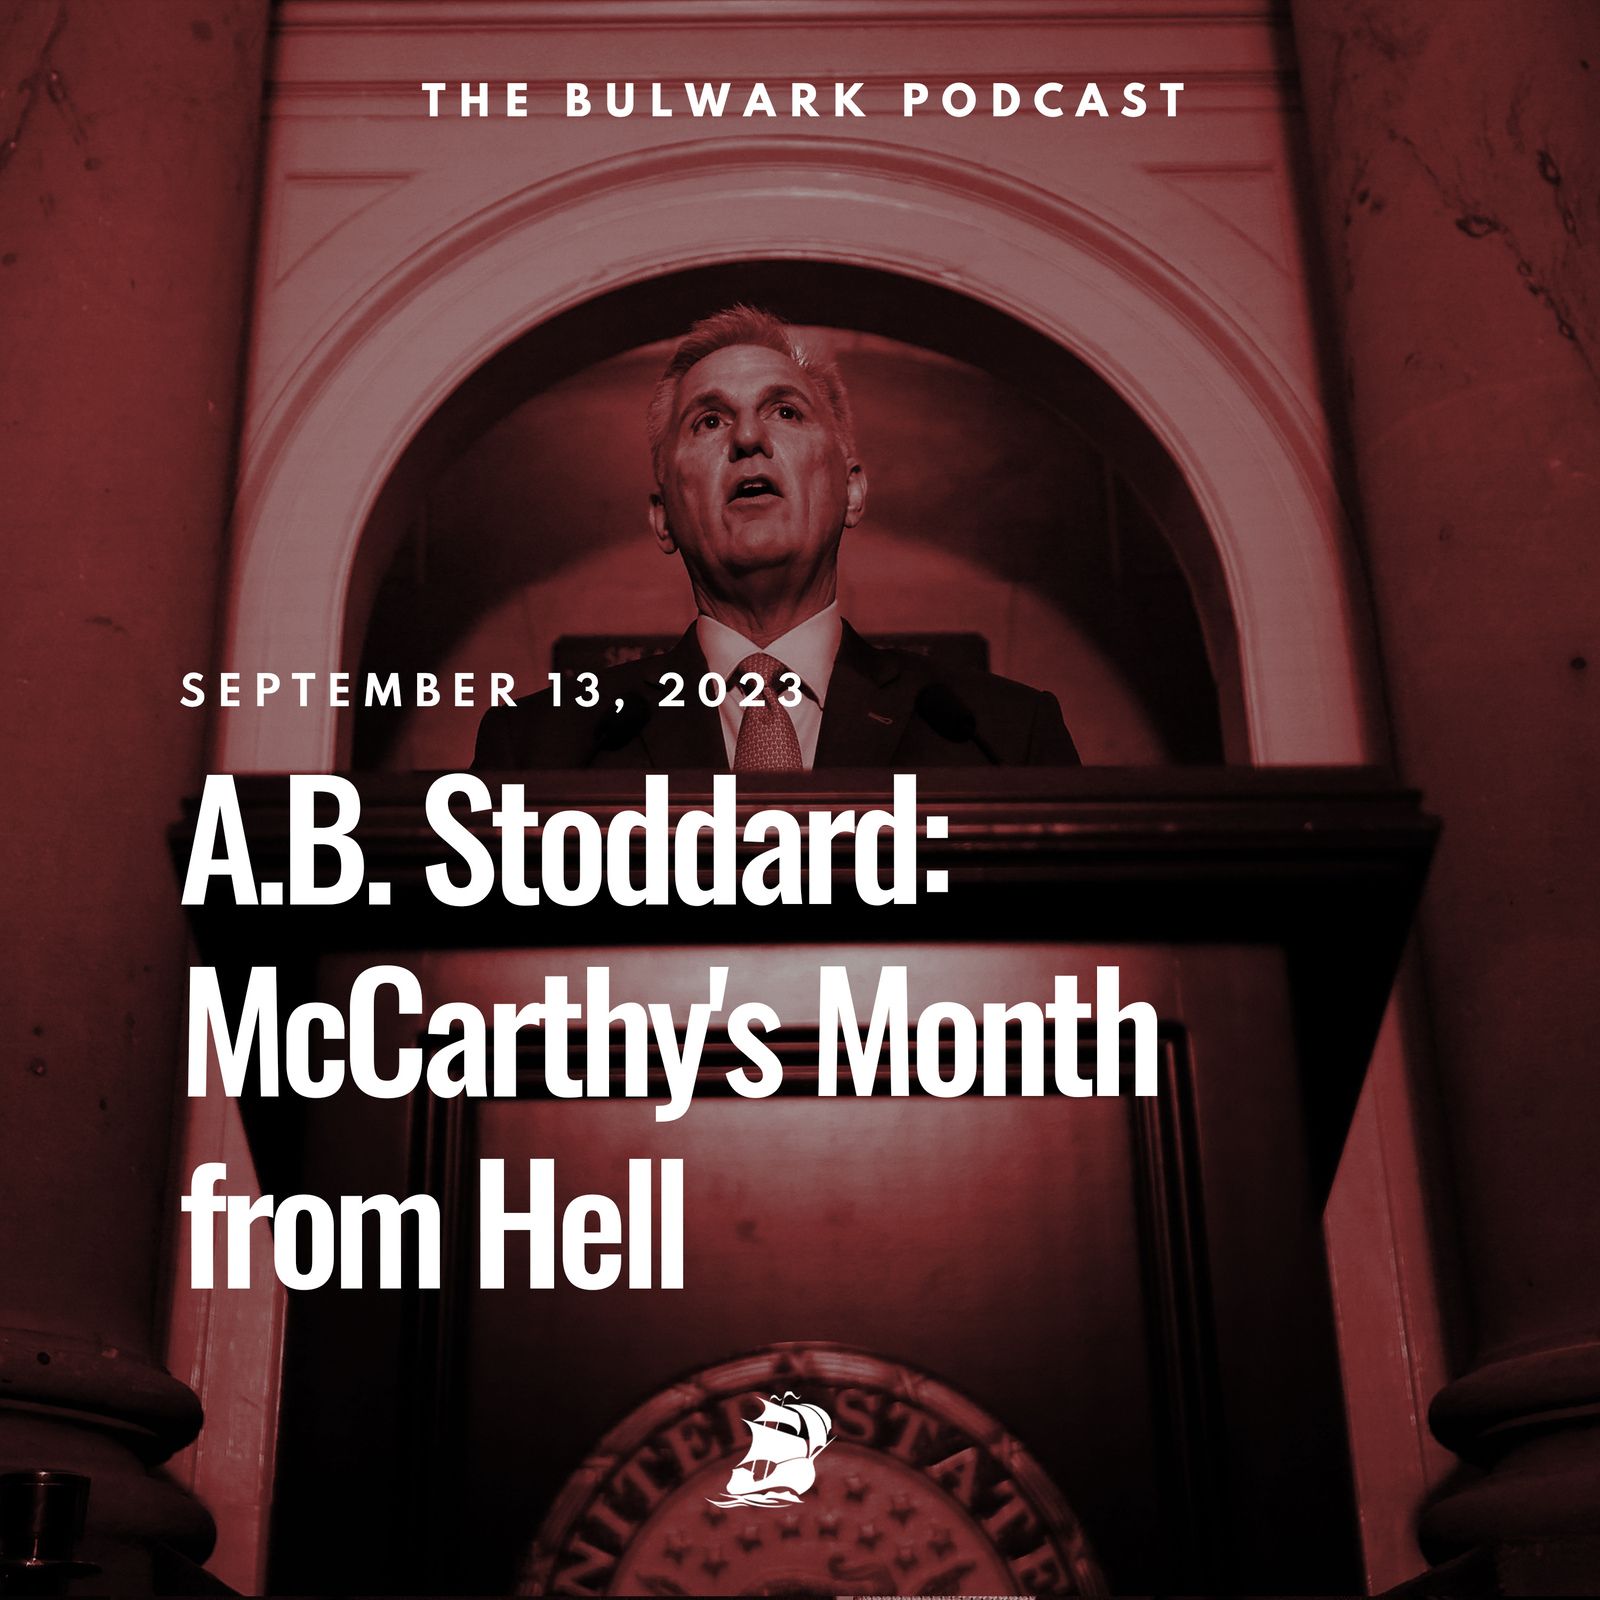 A.B. Stoddard: McCarthy's Month from Hell